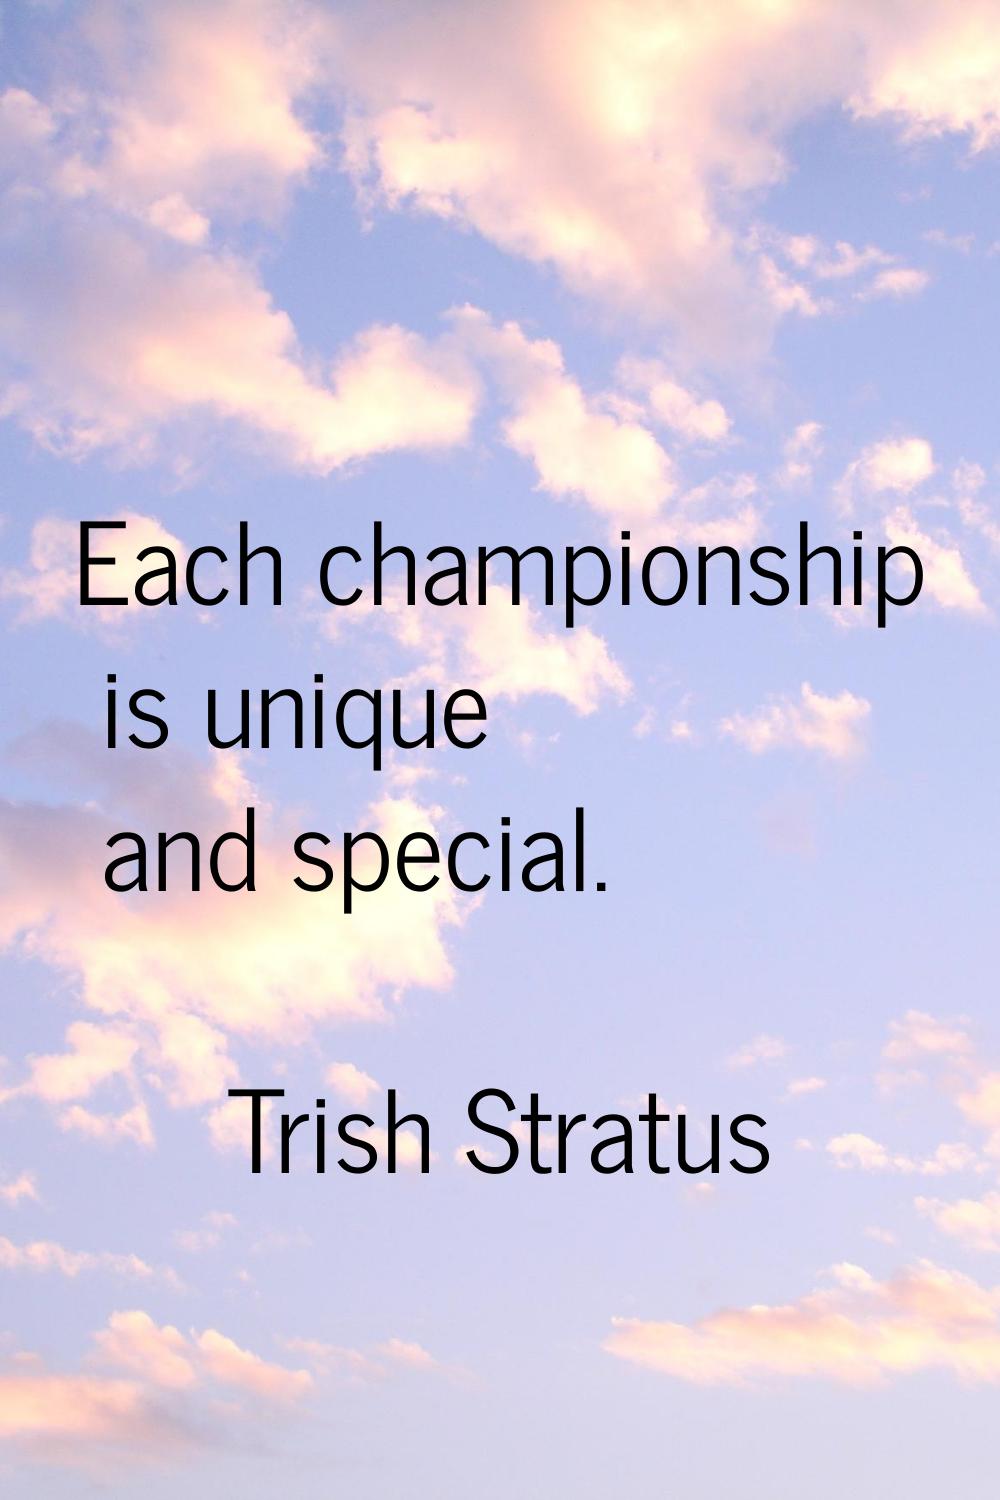 Each championship is unique and special.